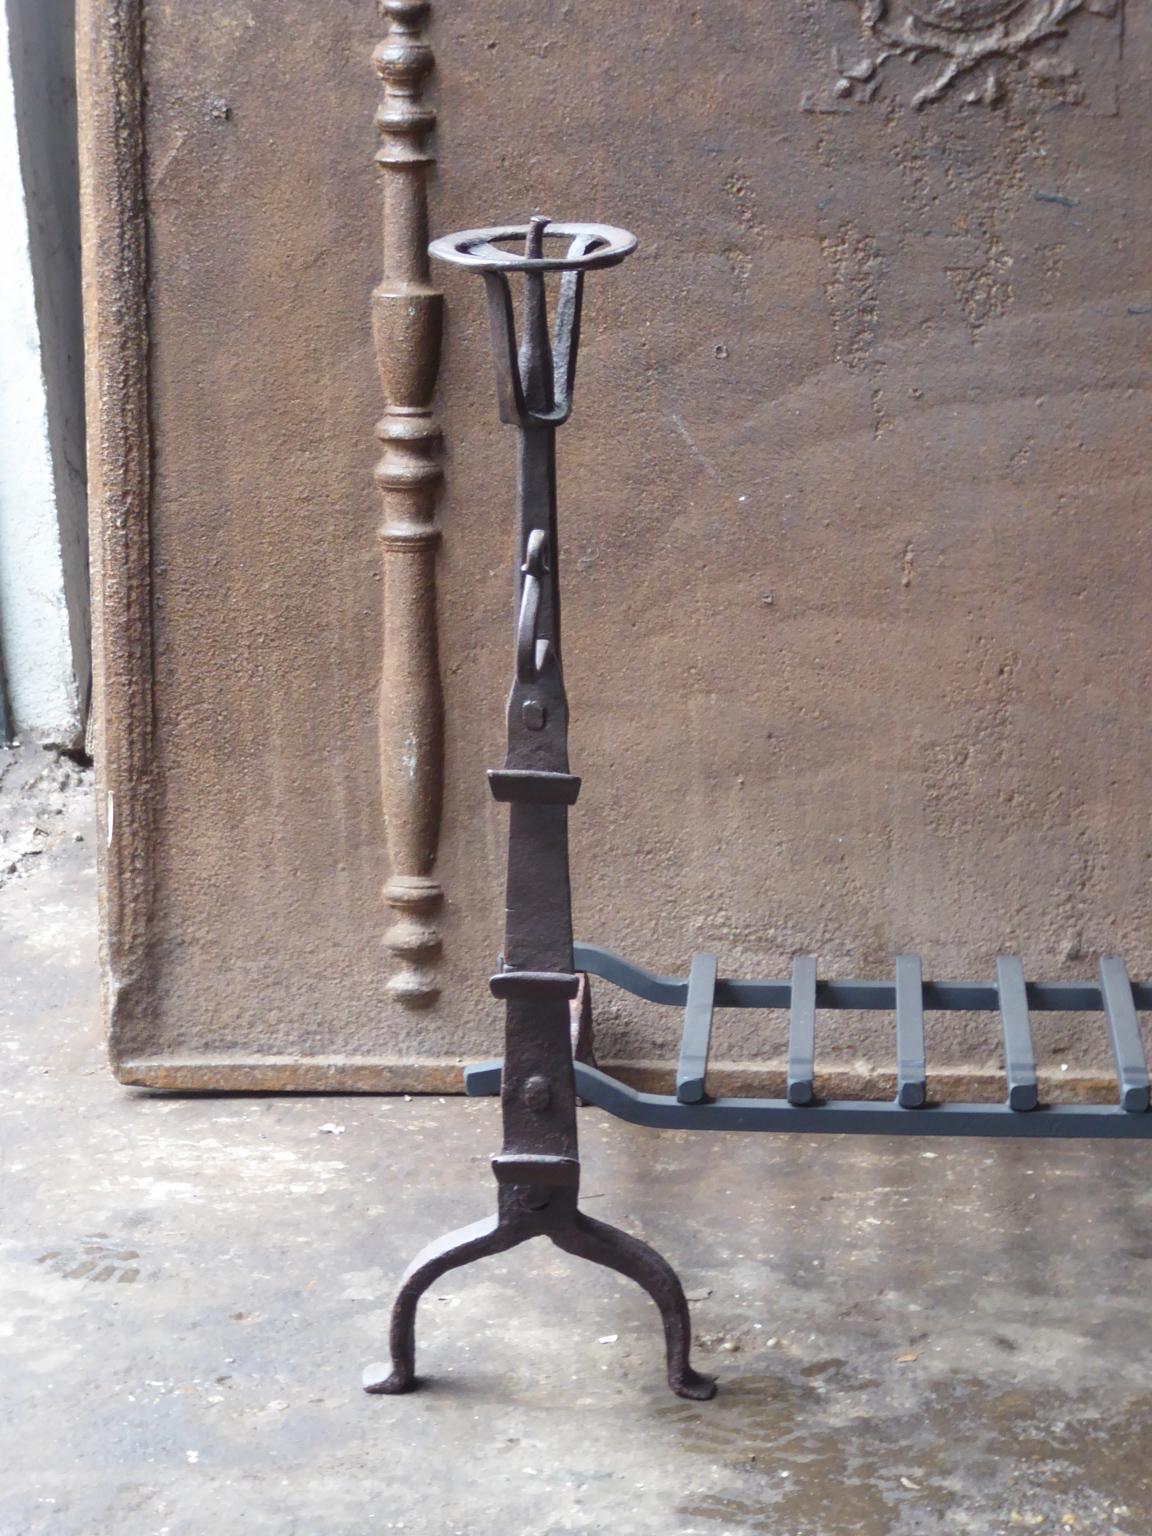 17th century French Louis XIII period fire grate. Made of beautifully forged wrought iron. The condition is good.

The width at the front is 70.5 cm (27.8 inches).




